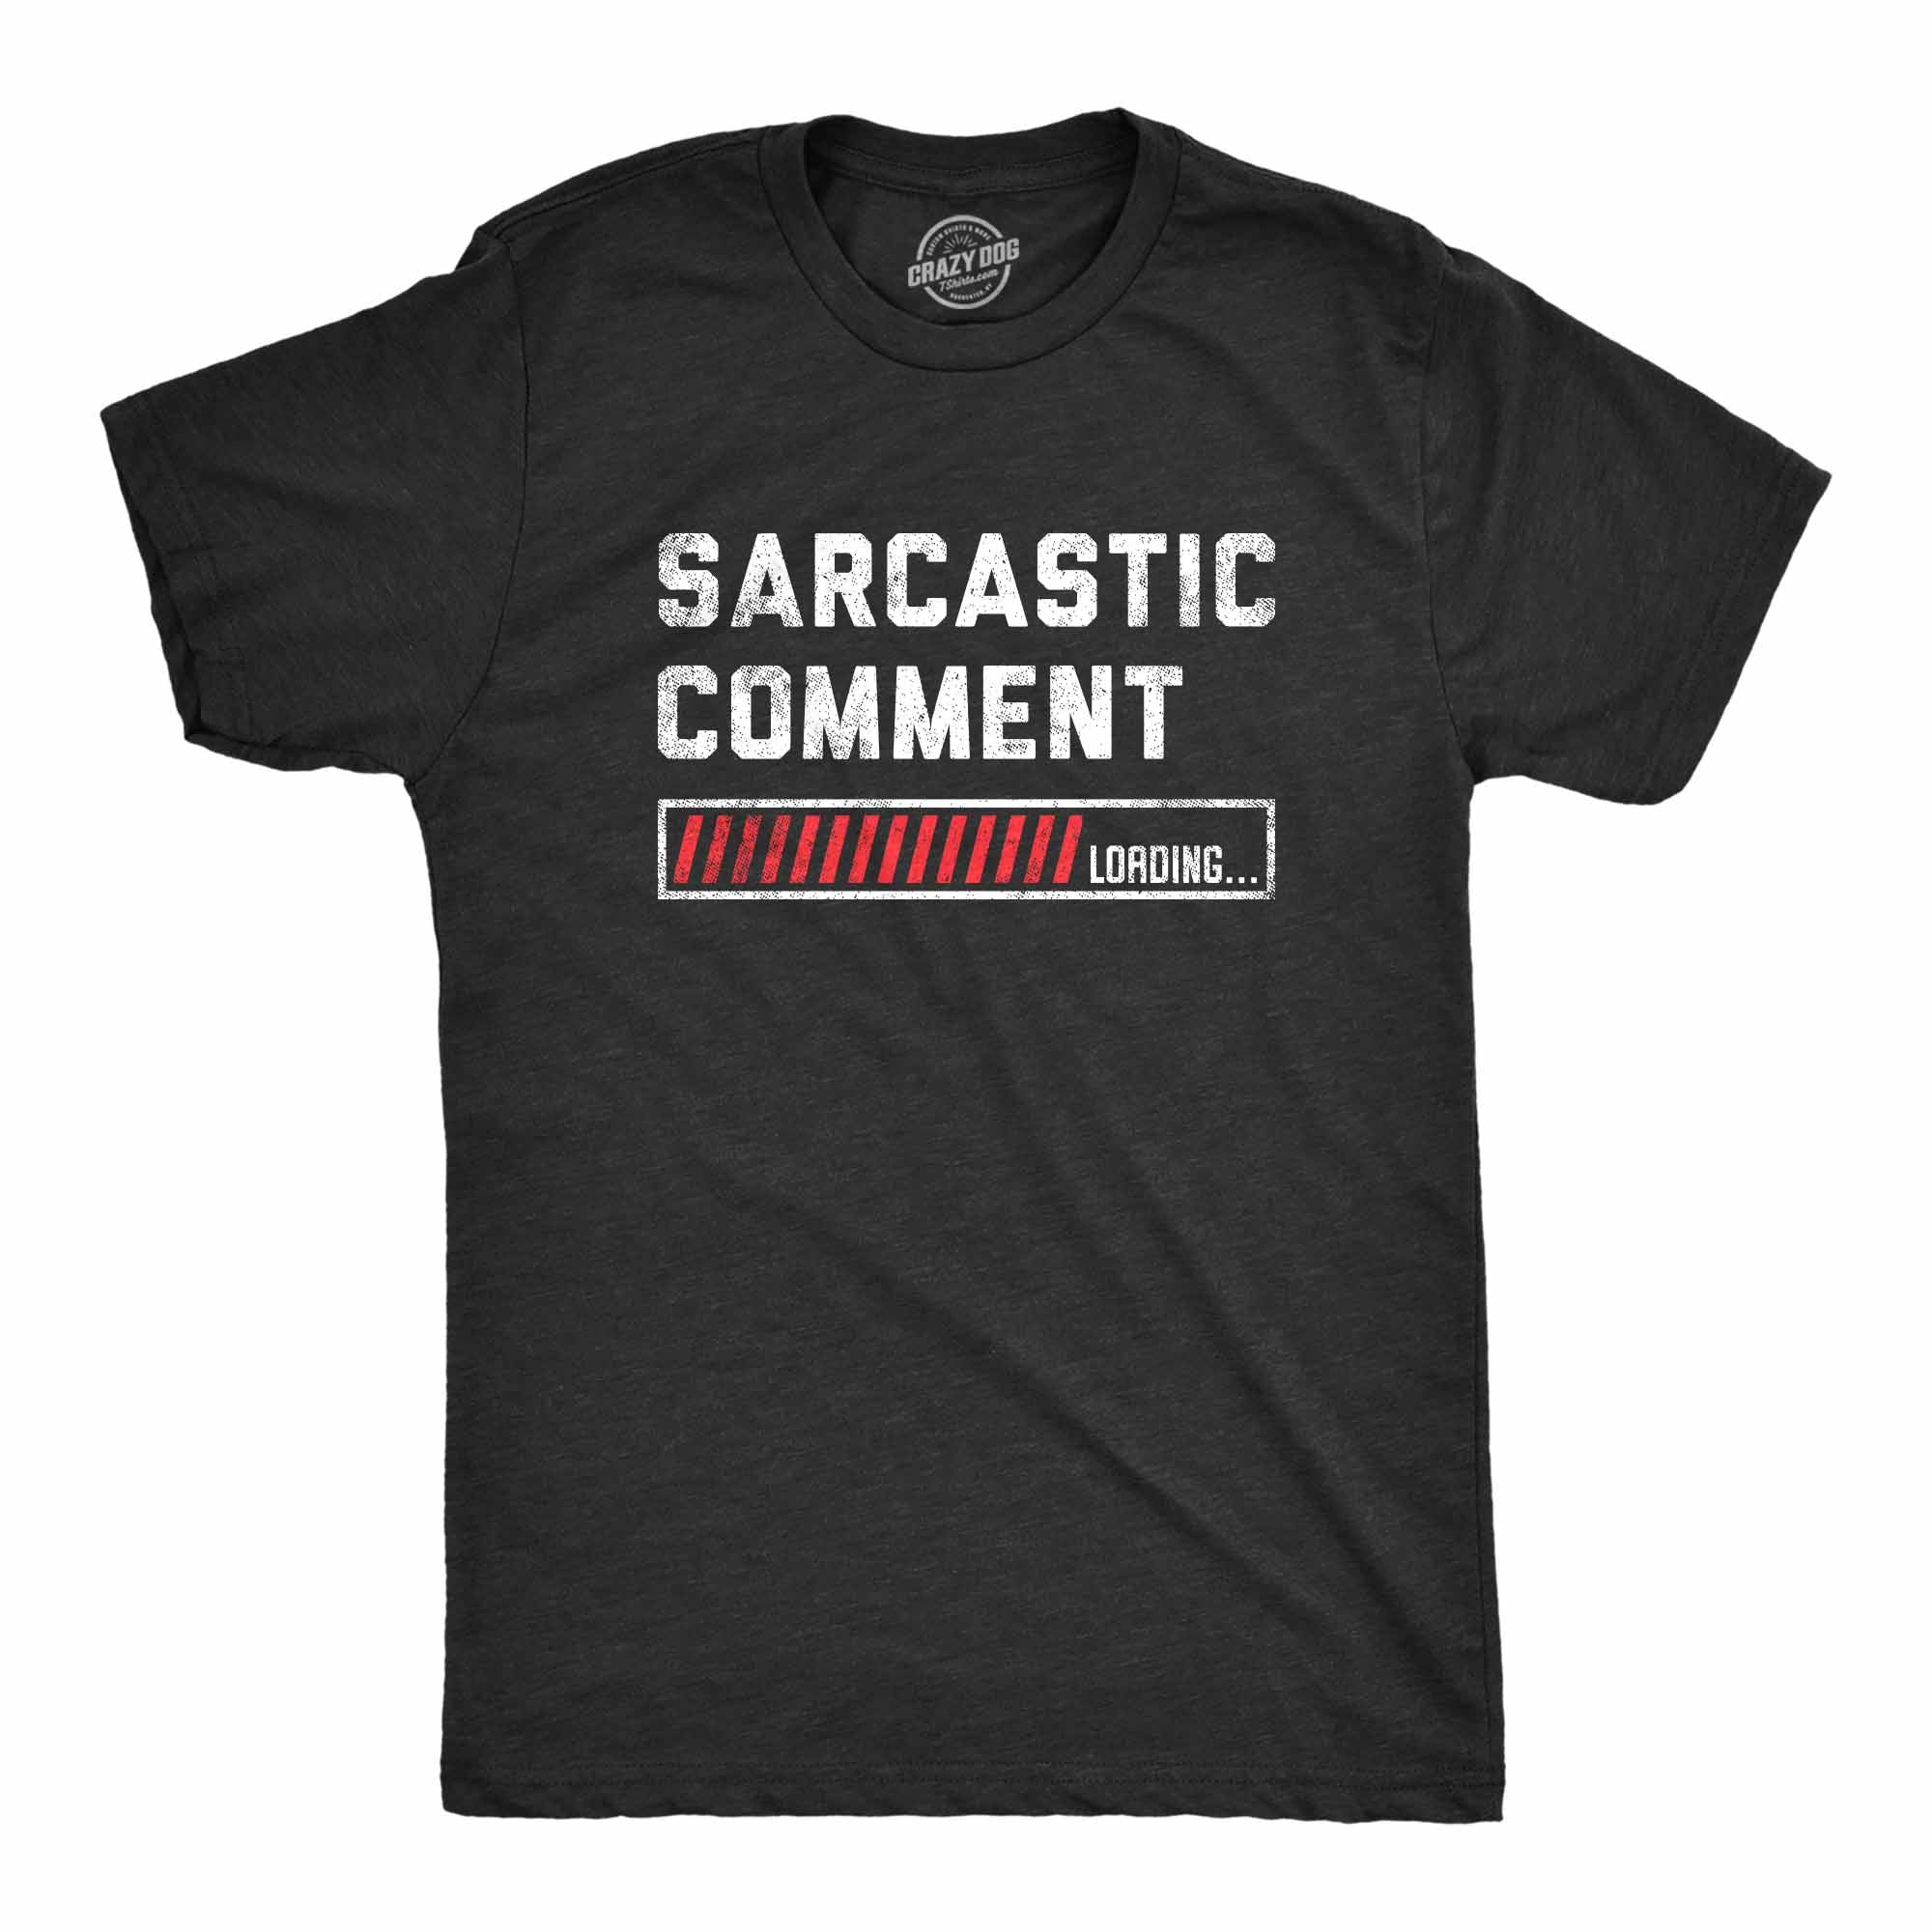 Funny Heather Black Sarcastic Comment Loading Mens T Shirt Nerdy Father's Day Sarcastic Tee